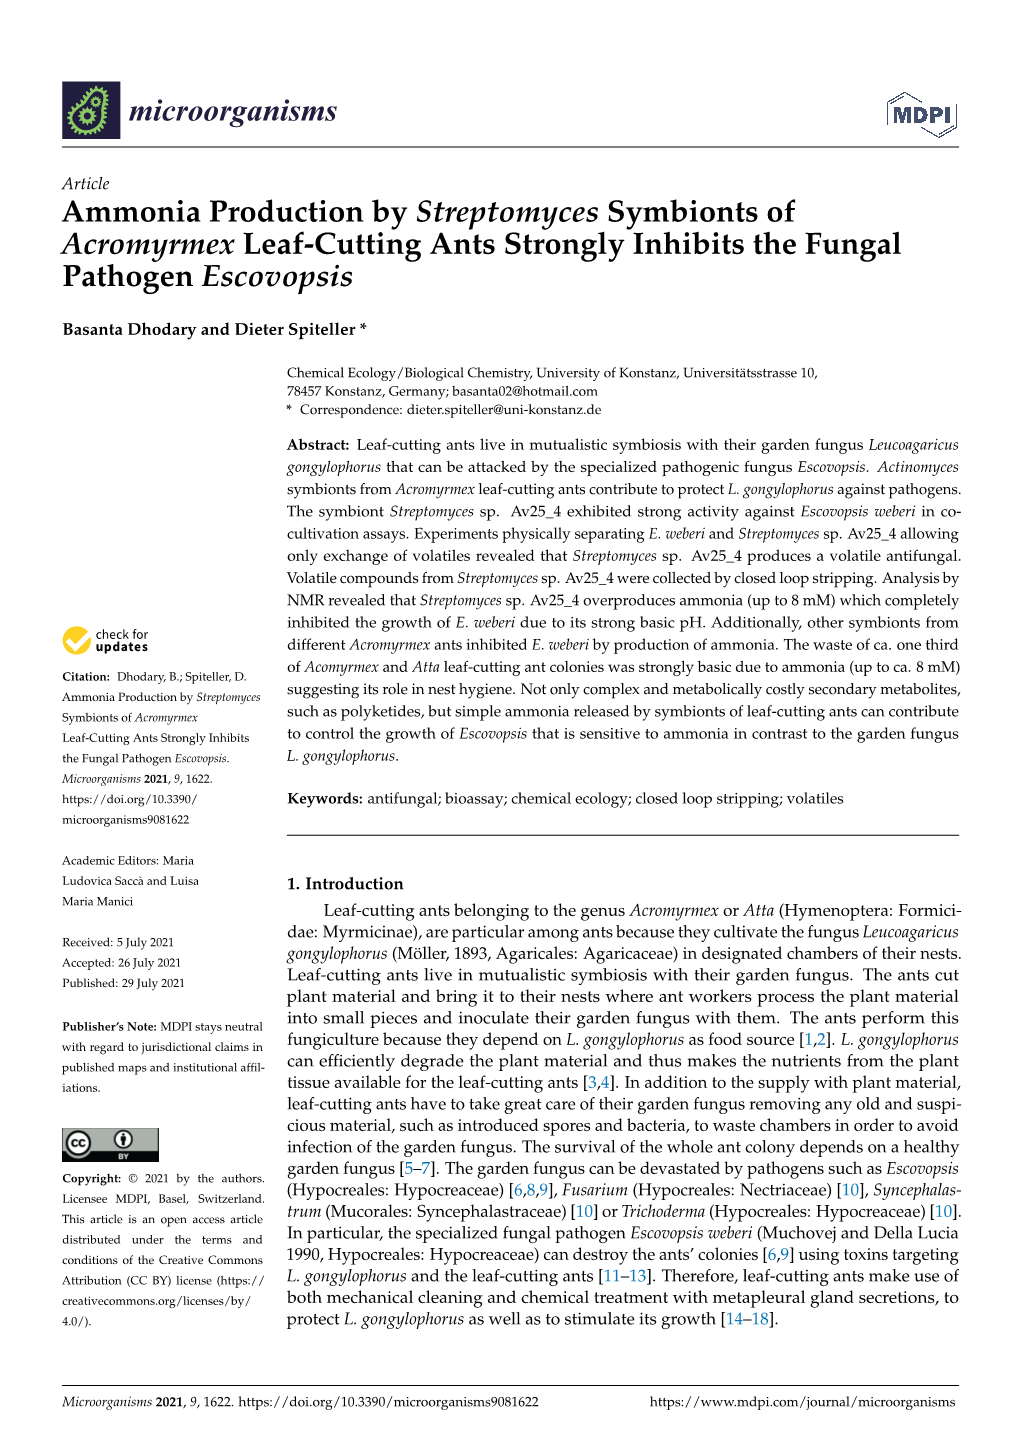 Ammonia Production by Streptomyces Symbionts of Acromyrmex Leaf-Cutting Ants Strongly Inhibits the Fungal Pathogen Escovopsis